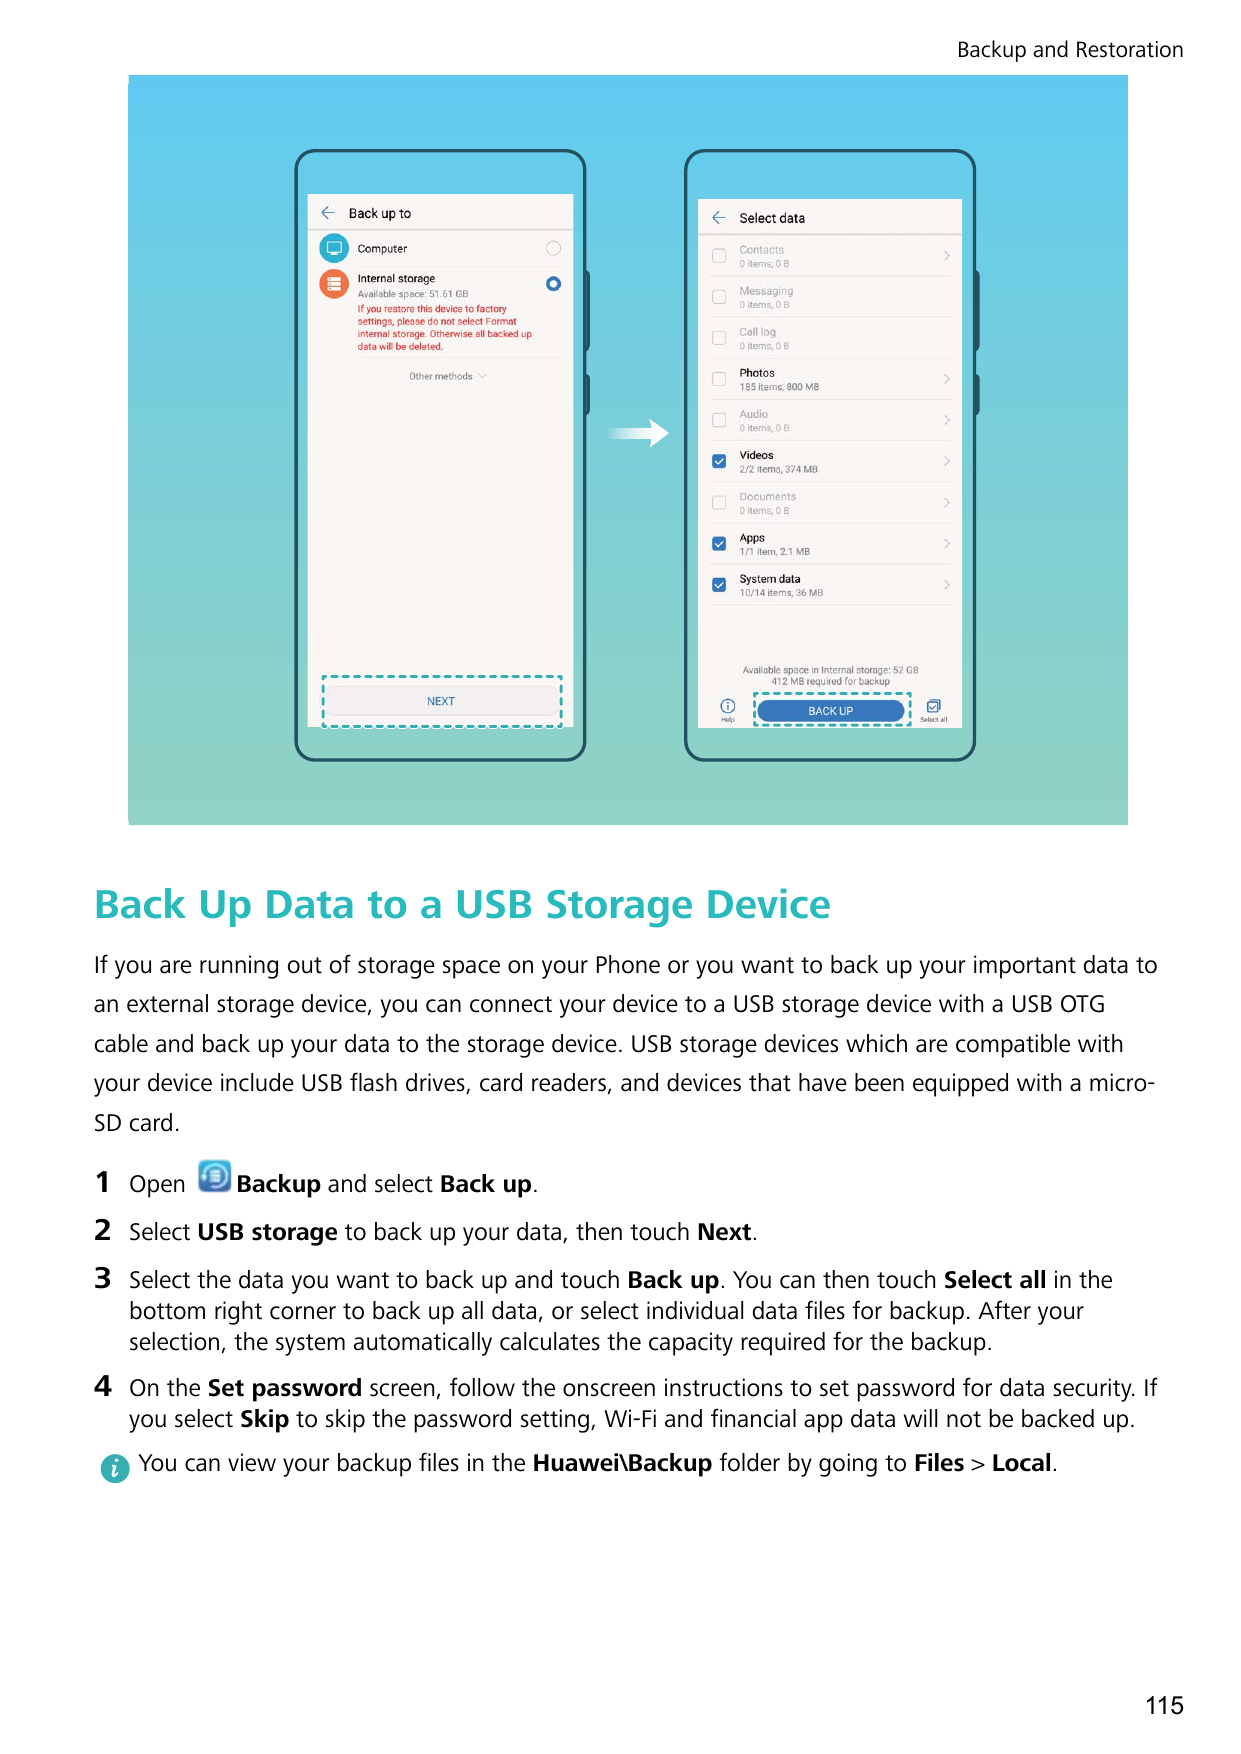 Backup and RestorationBack Up Data to a USB Storage DeviceIf you are running out of storage space on your Phone or you want to b